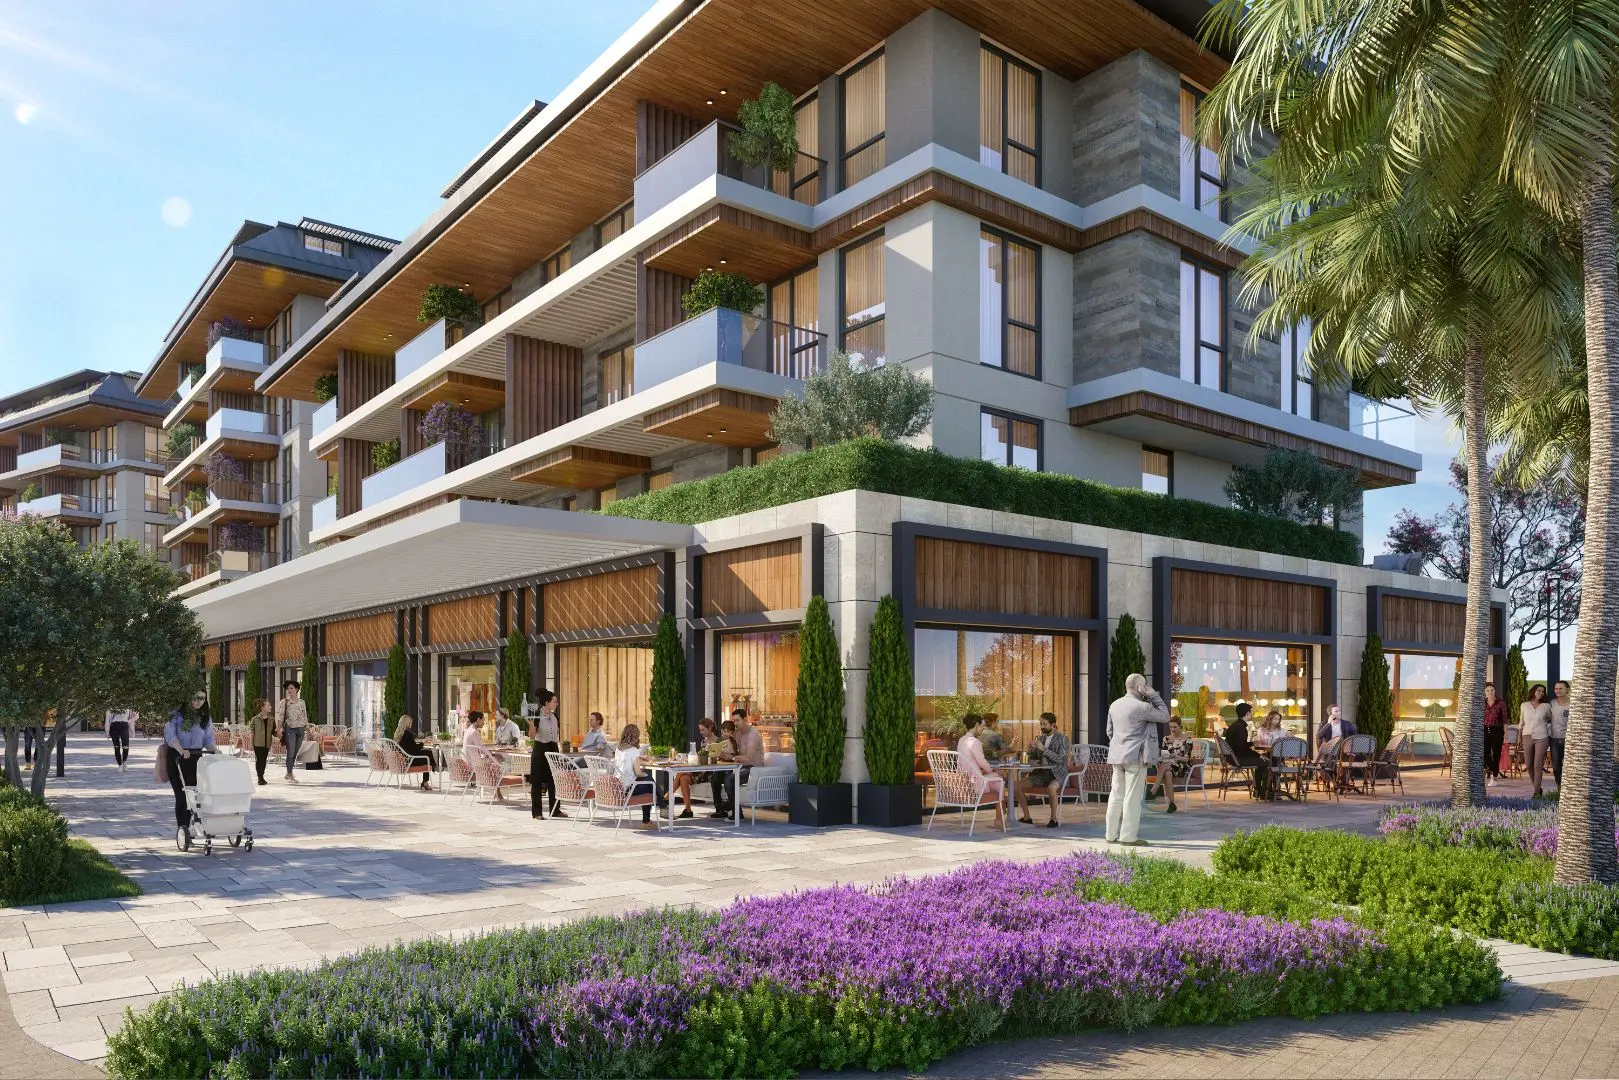 LARGE-SCALE RESIDENTIAL COMPLEX PROJECT IN DEMANDED OBA AREA, ALANYA